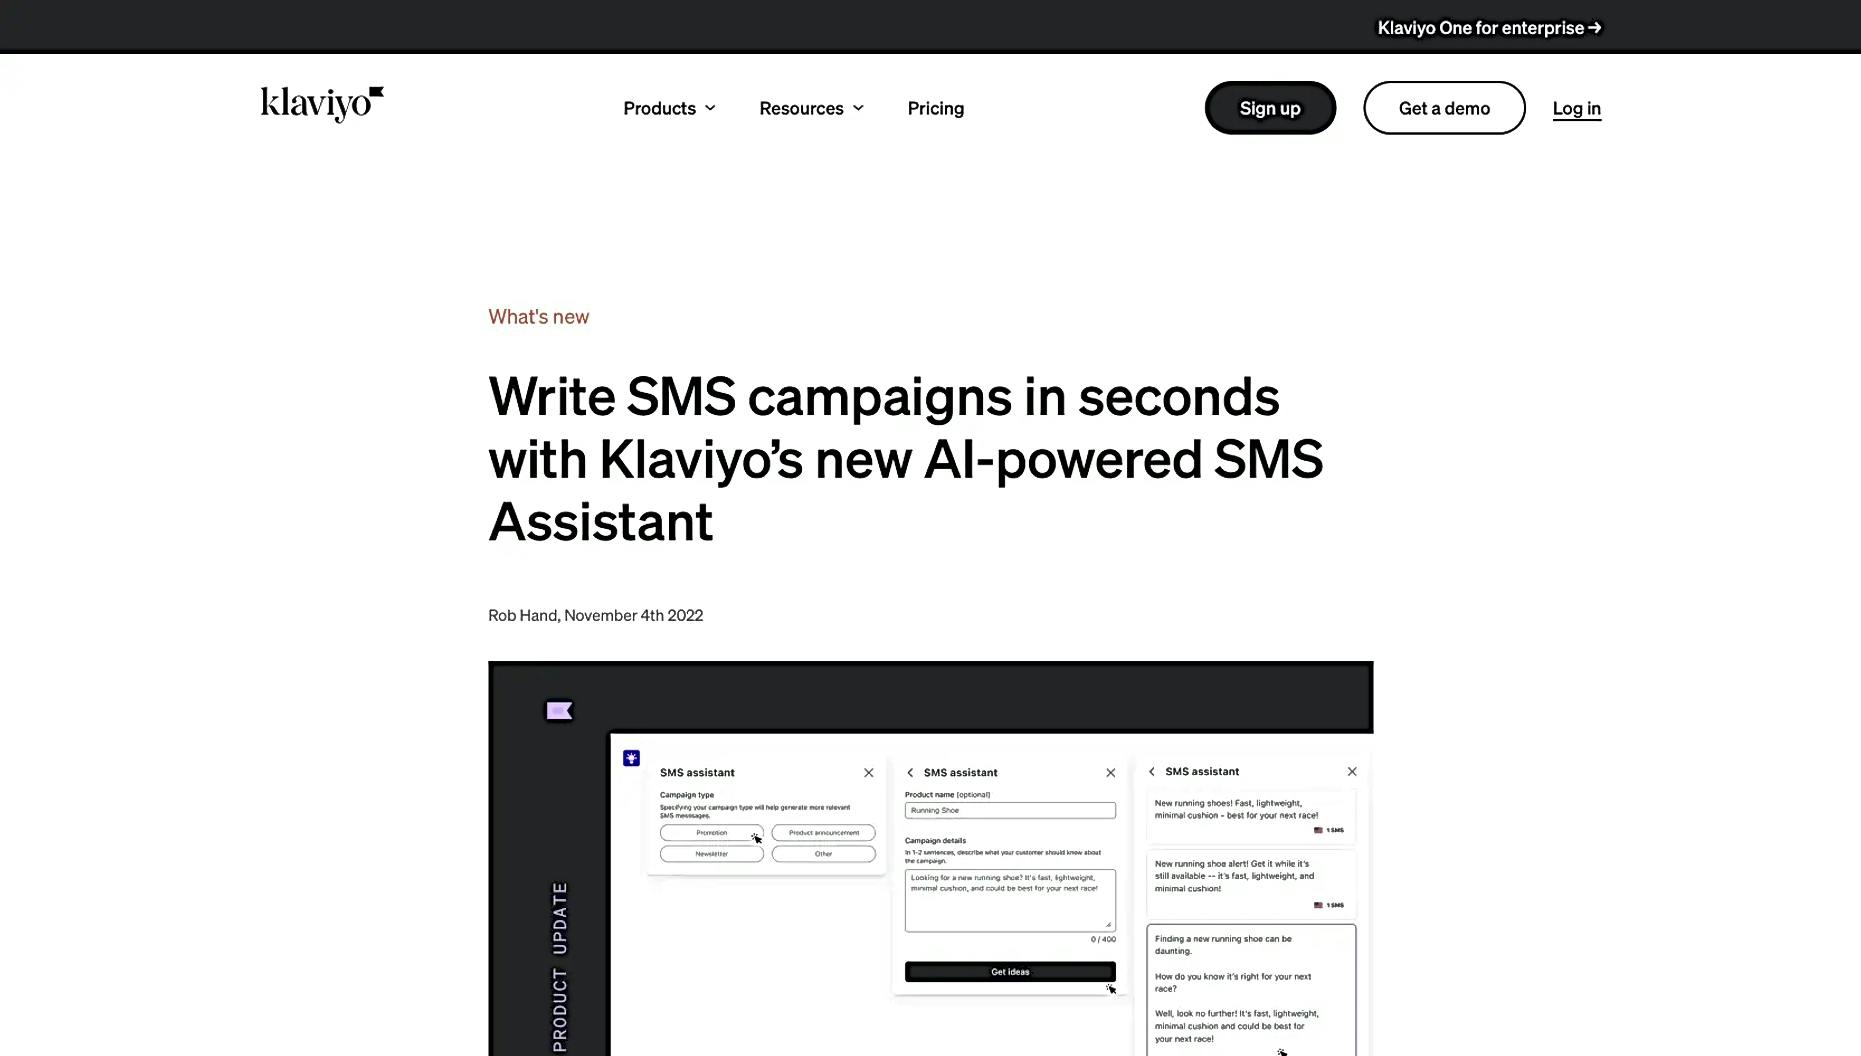 Klaviyo SMS Assistant featured